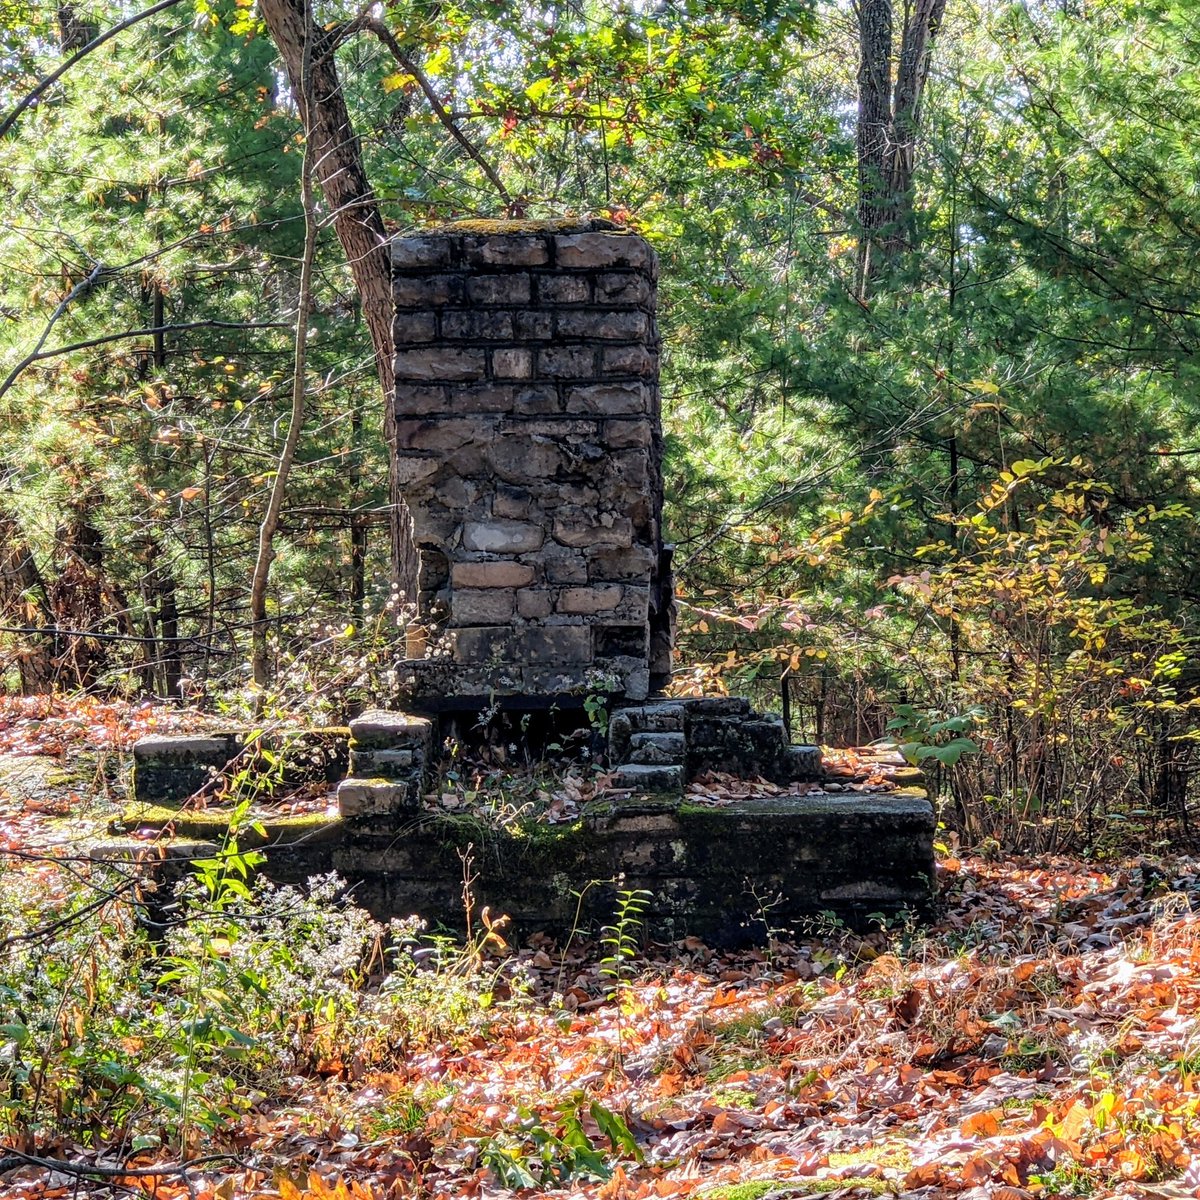 About halfway round the trail loop was the remains of a house. Nothing standing but the chimney and hearth.